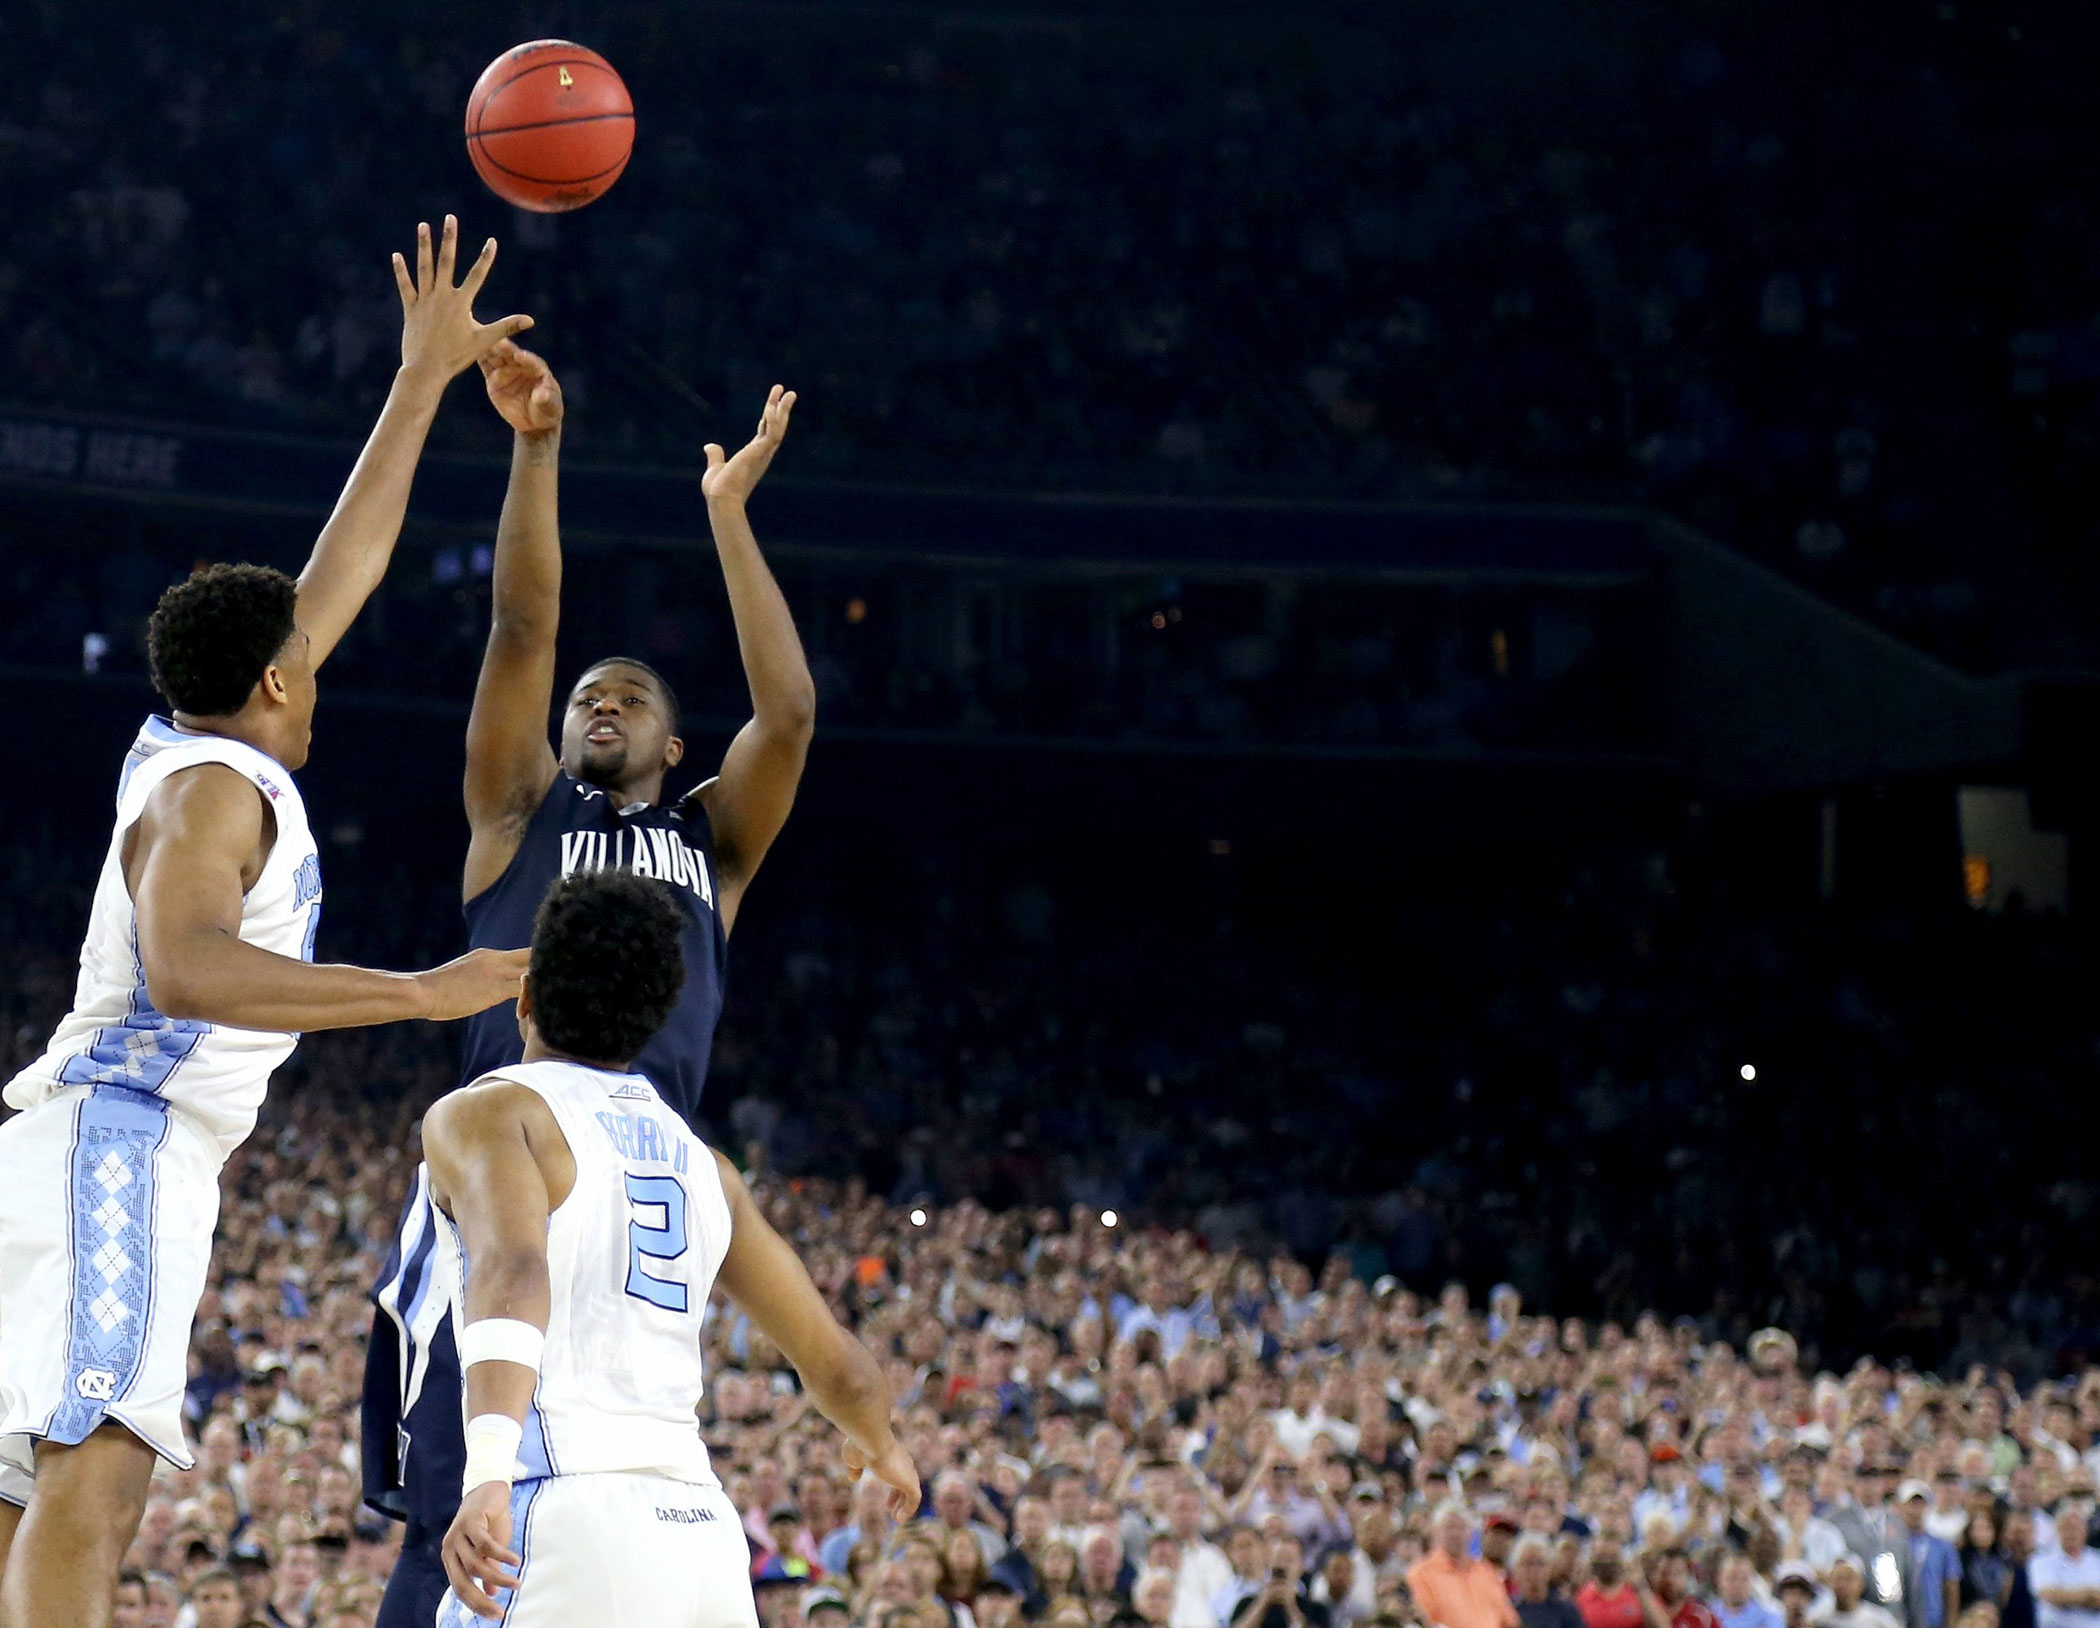 Villanova Wildcats' Kris Jenkins (2) shoots the game-winning three pointer to defeat the North Carolina Tar Heels 77-74 in the NCAA college basketball National Championship game on April 4, 2016 in Houston.